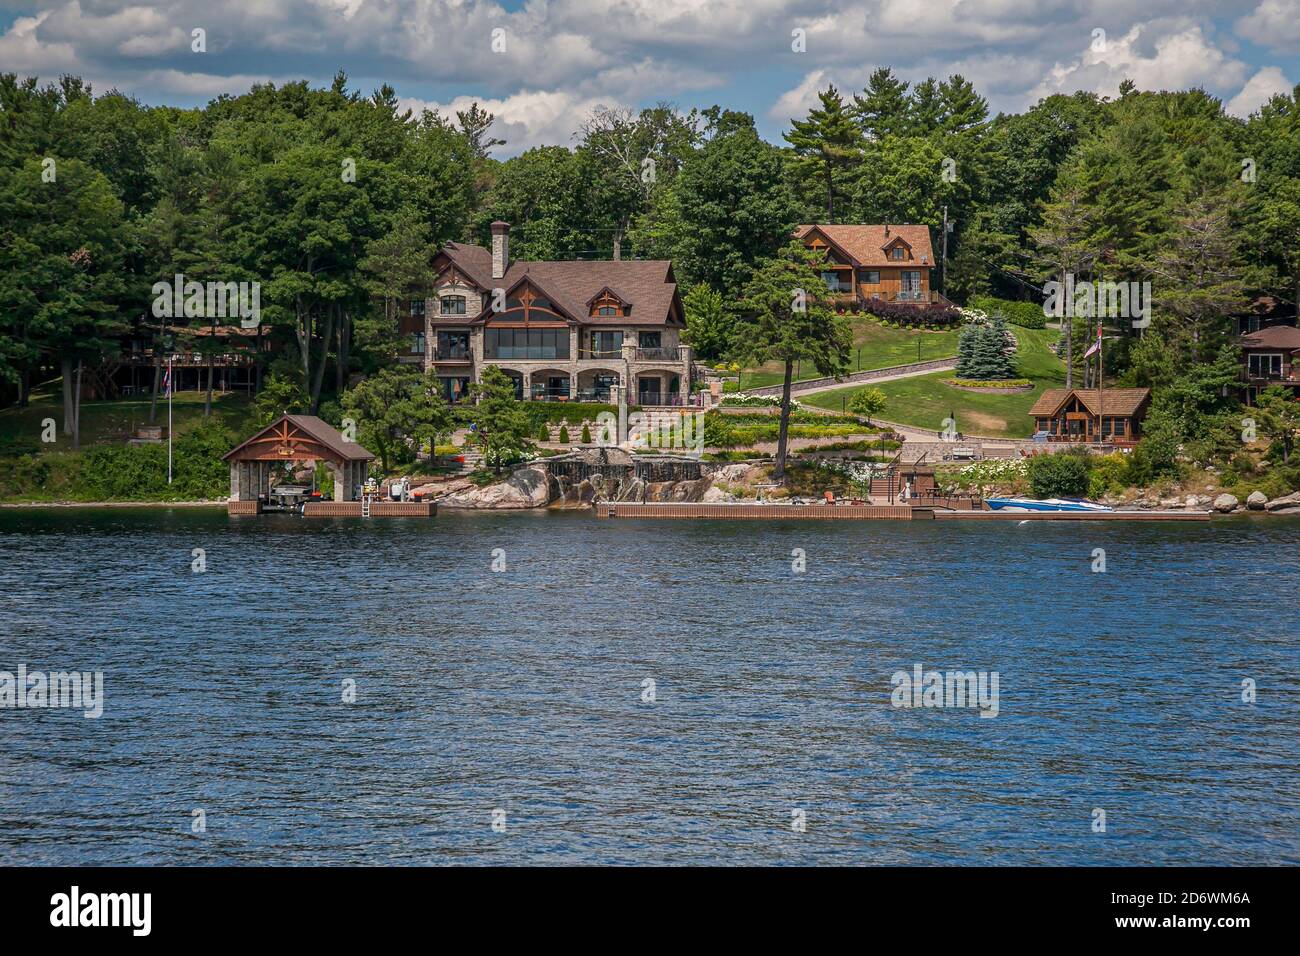 Ivy Lea, Ontario, Canada, July 2012 - Luxury cottages and bungalows on the coastline of the Thousand Islands waterway Stock Photo